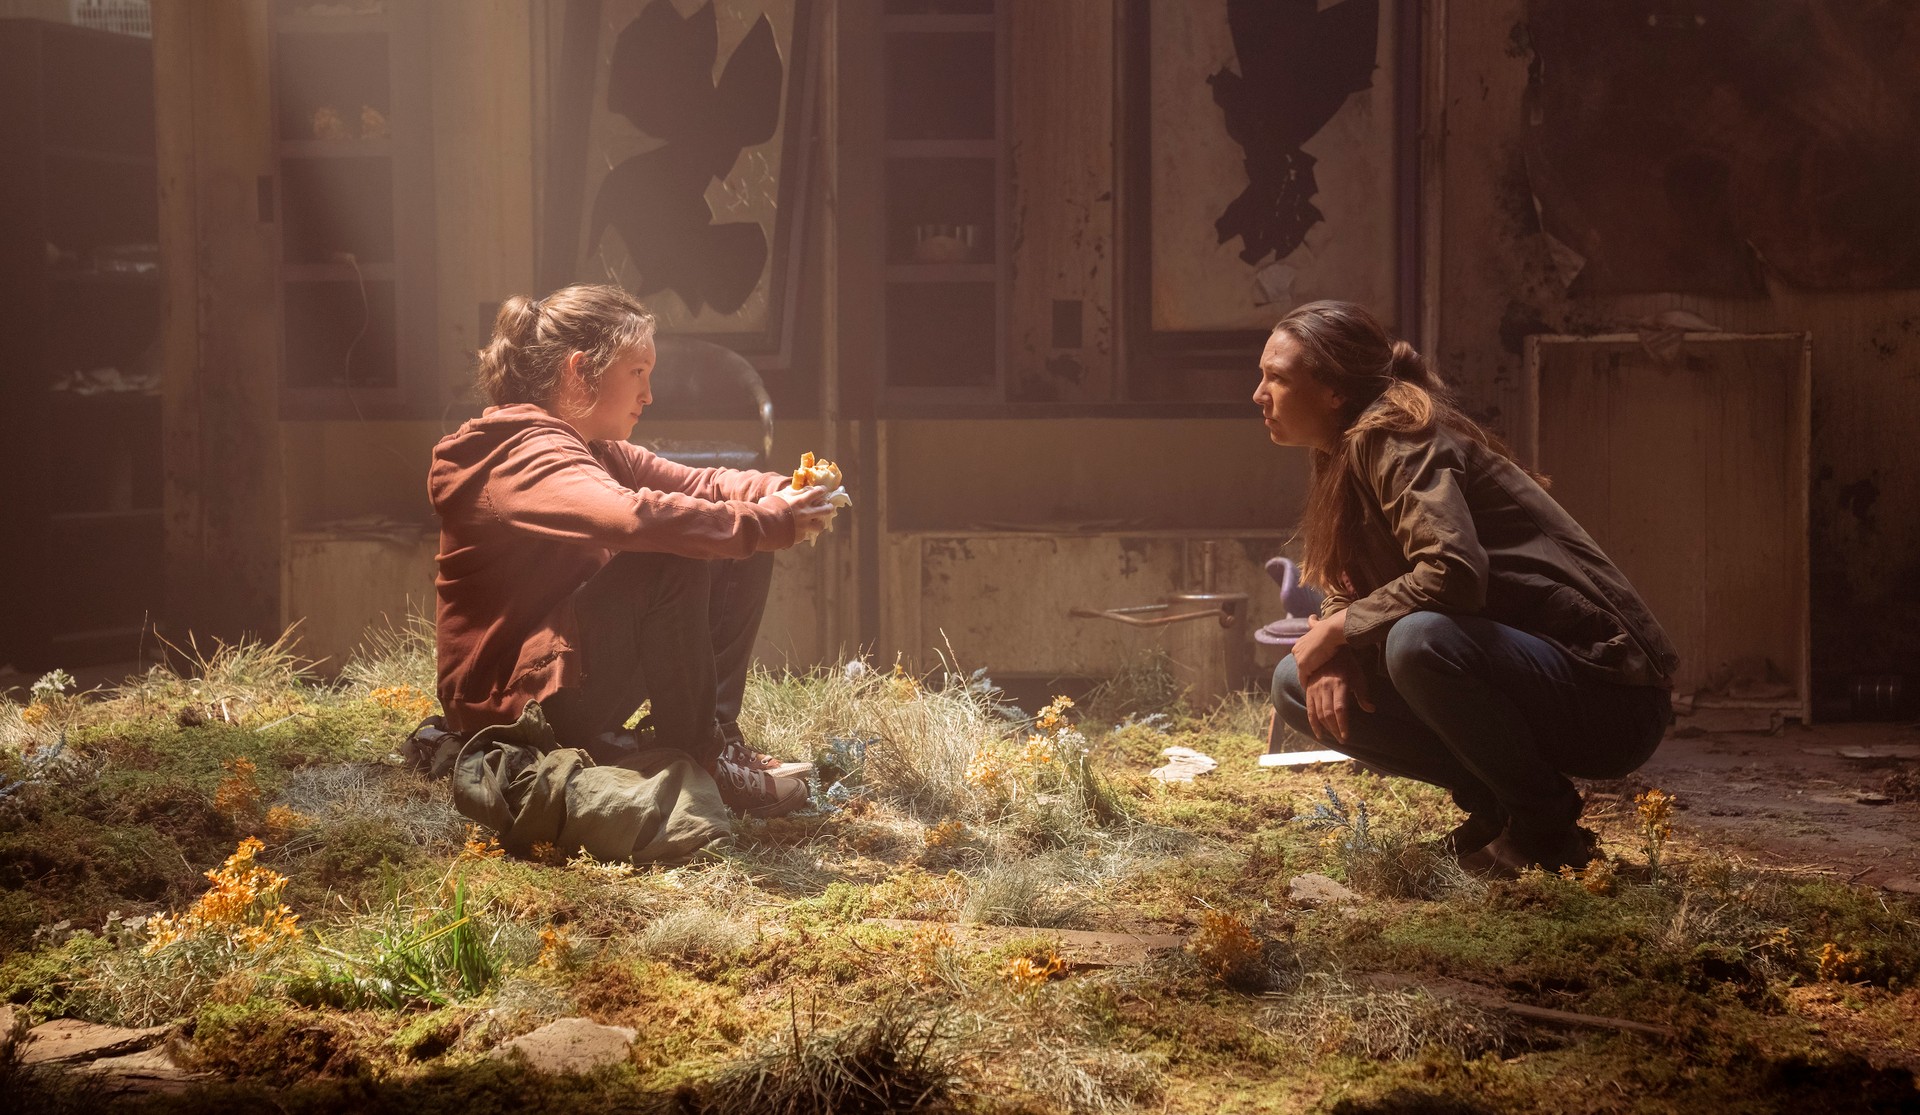 The Last of Us Episode 2 Review: Anna Torv Steals the Show as Tess